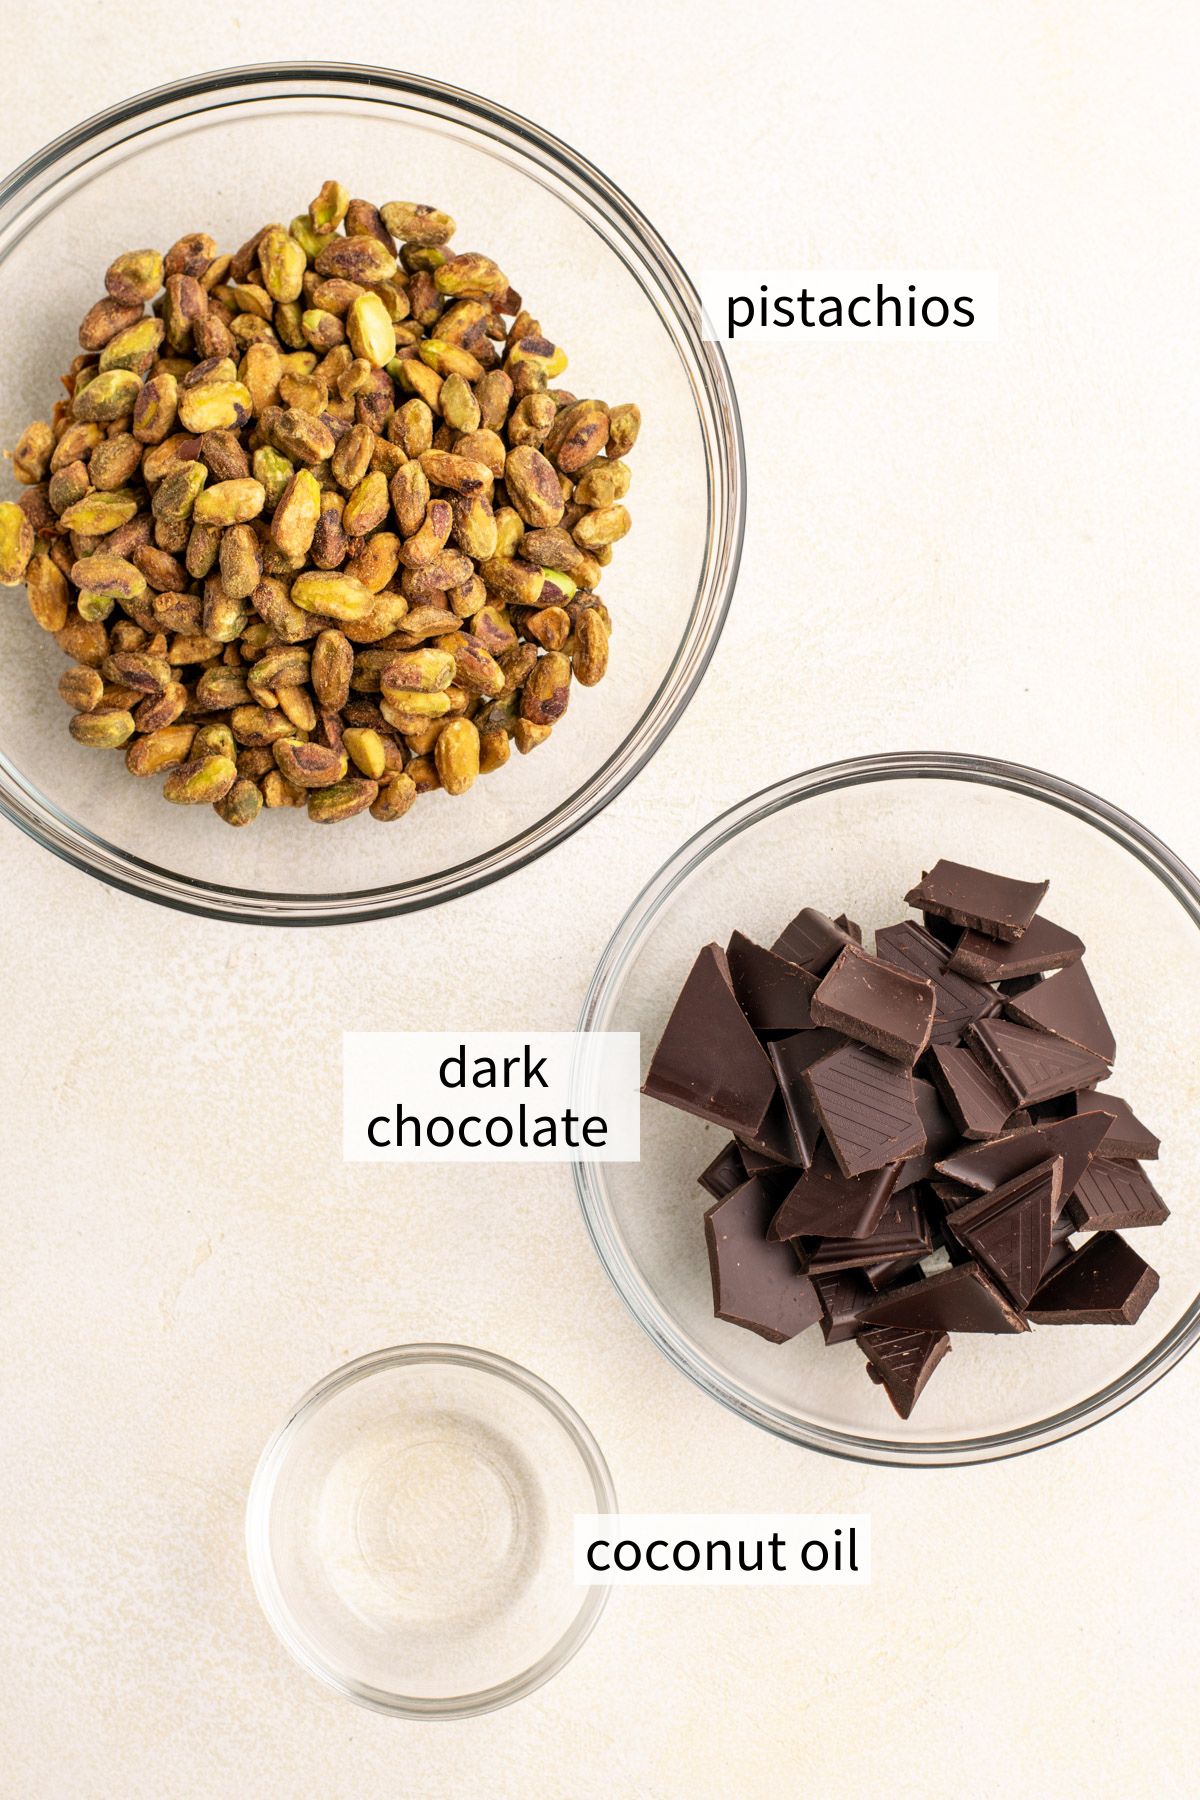 ingredients to make chocolate covered pistachios.